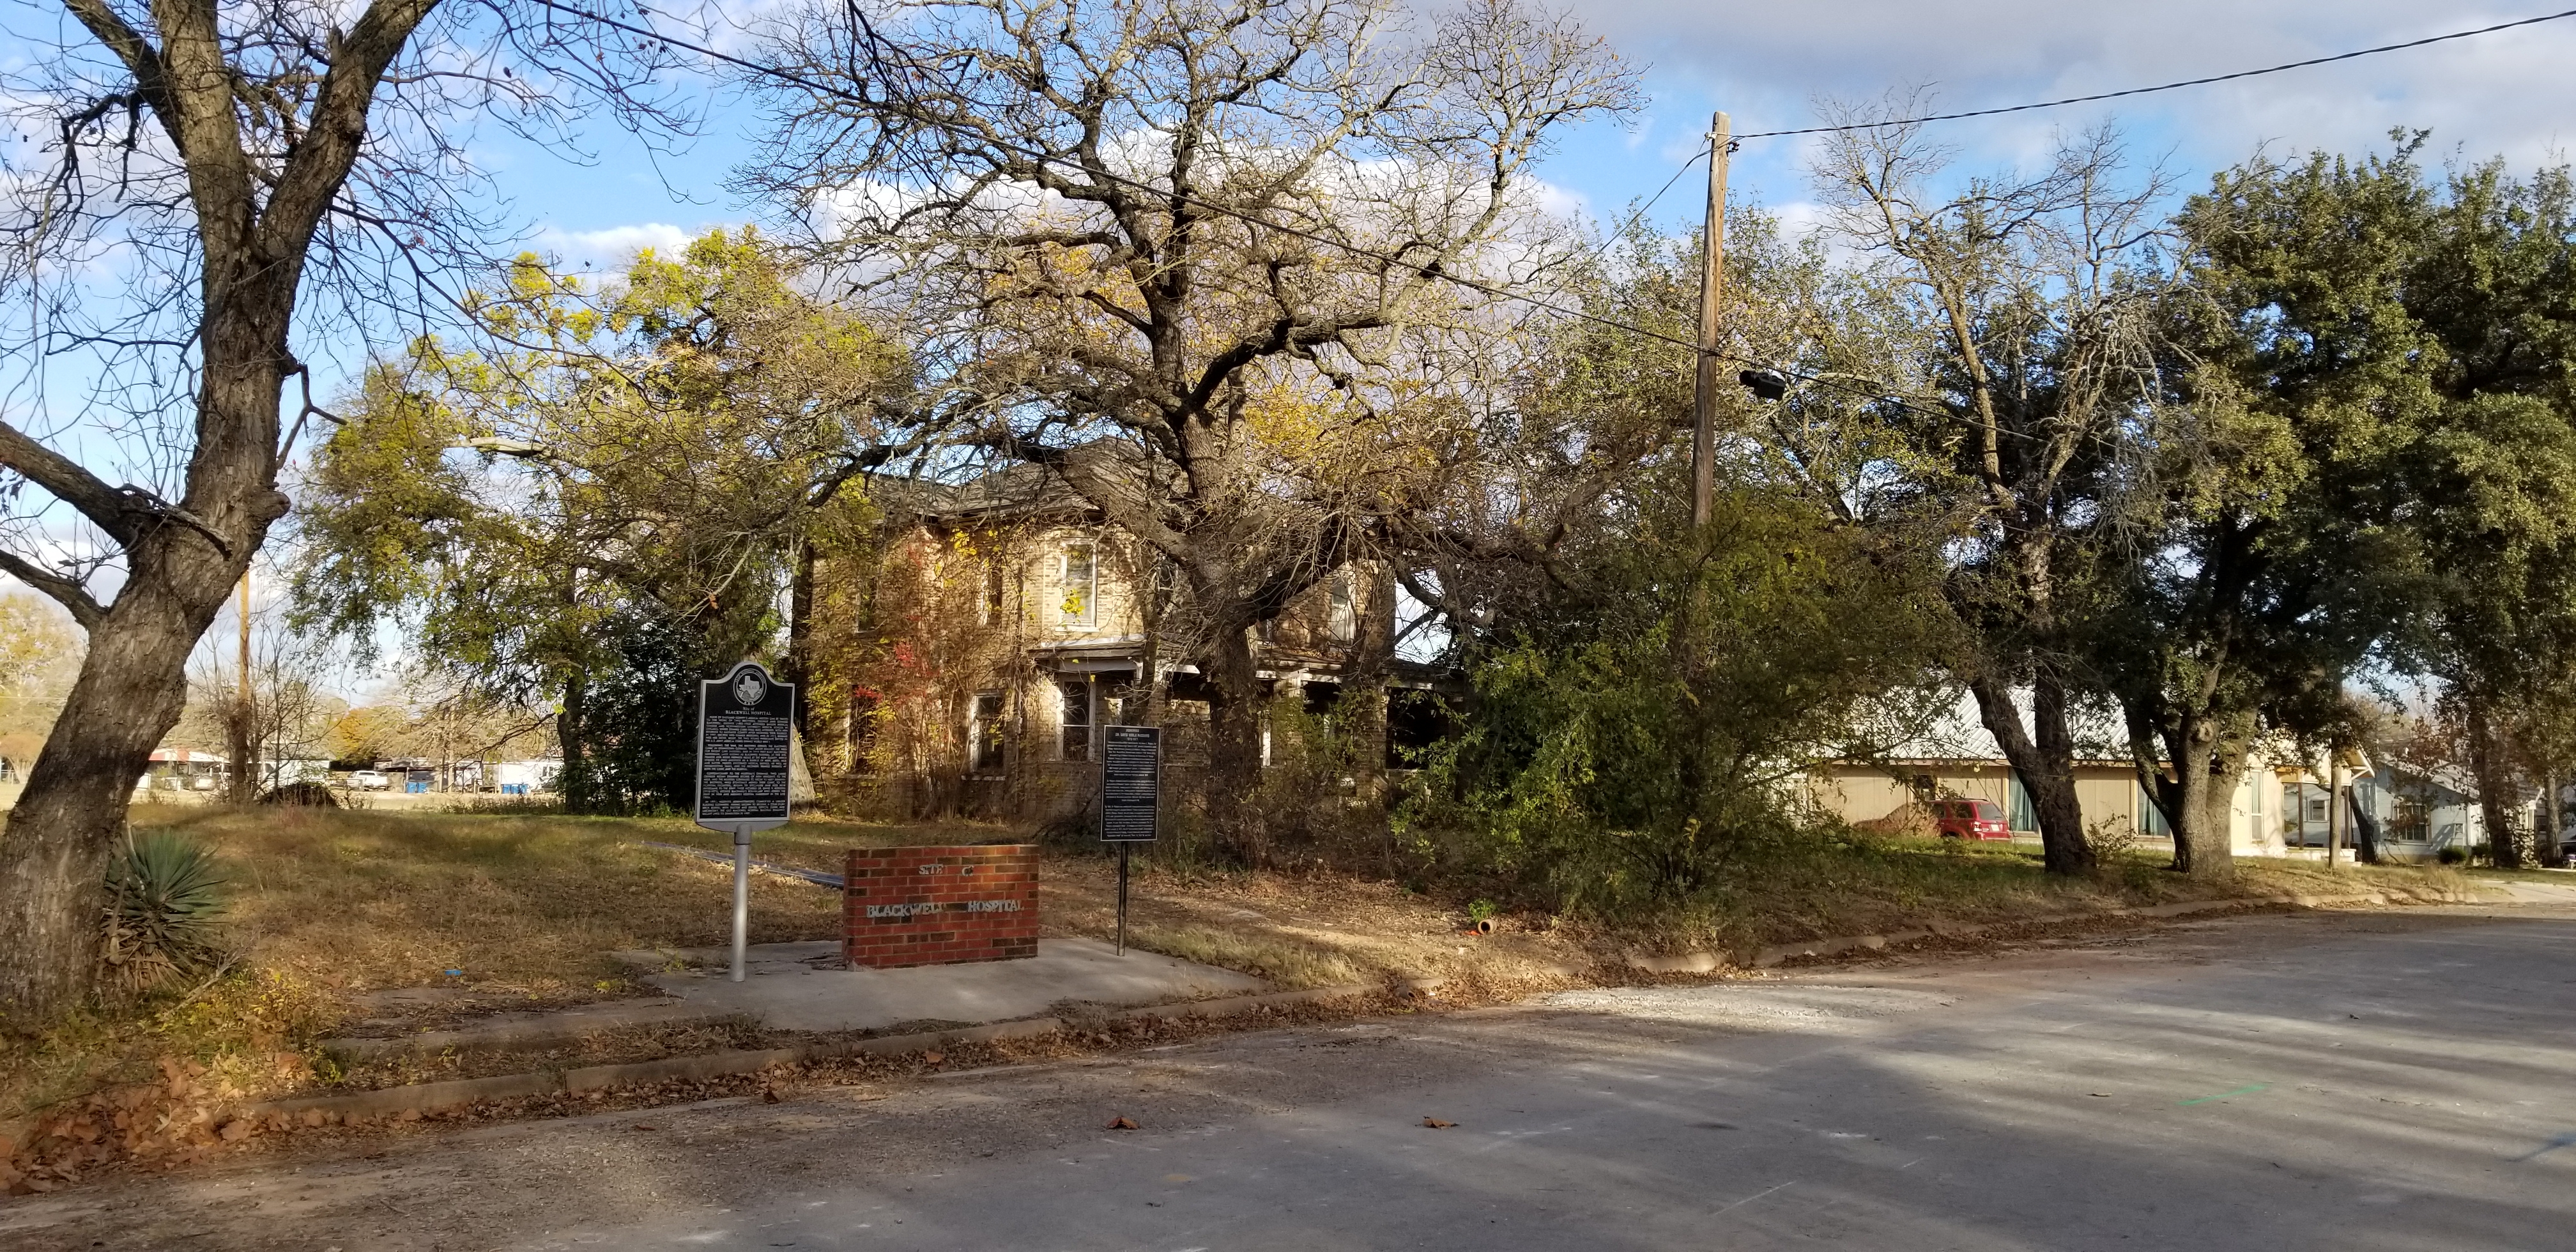 Site of Blackwell Hospital Marker - view from the street.